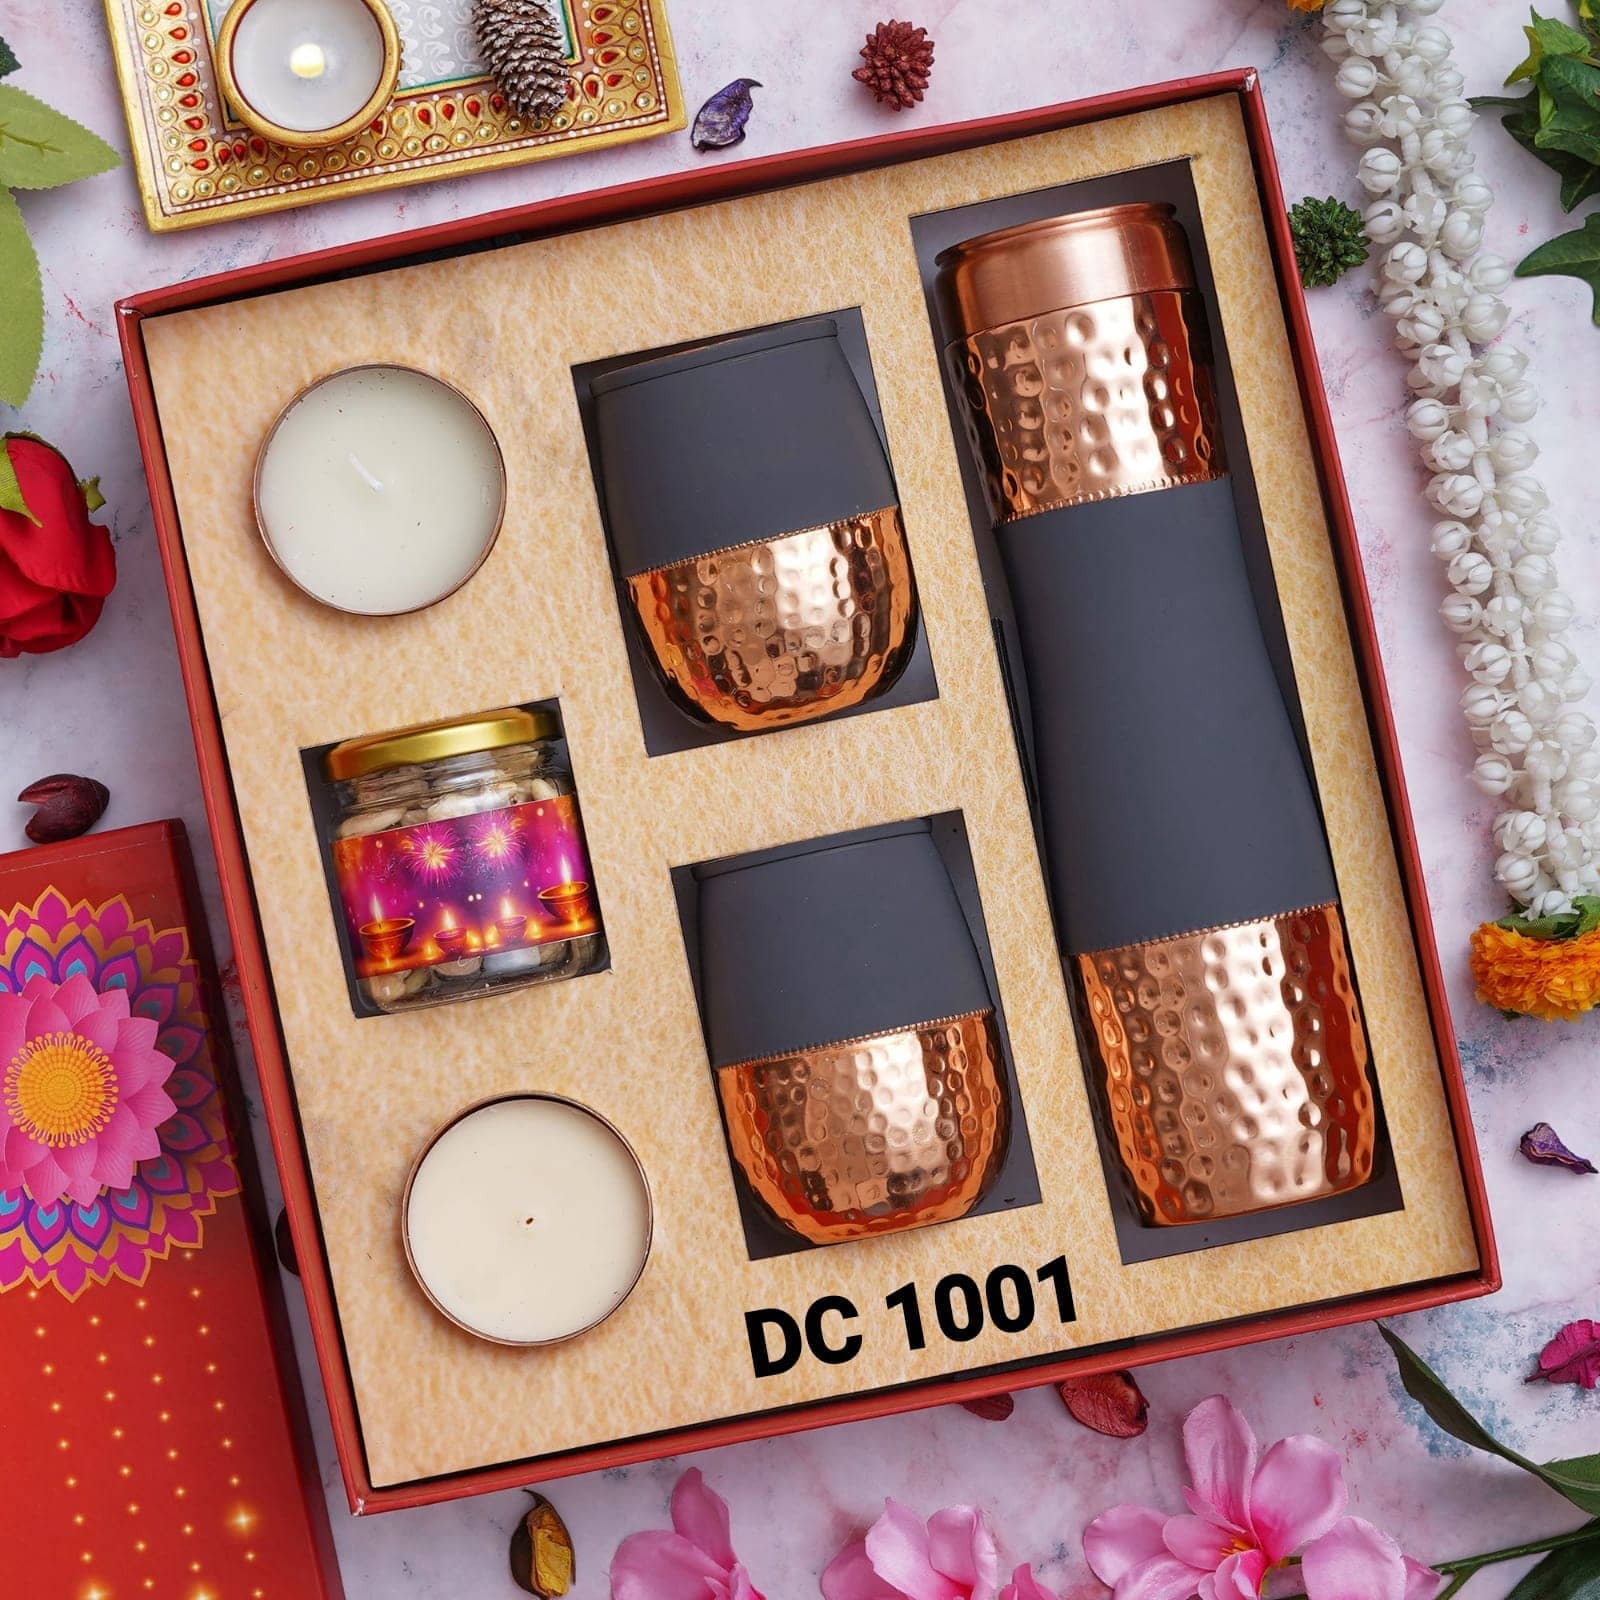 Best Diwali Gift Ideas With Chocolates, Dry Fruits & Nuts